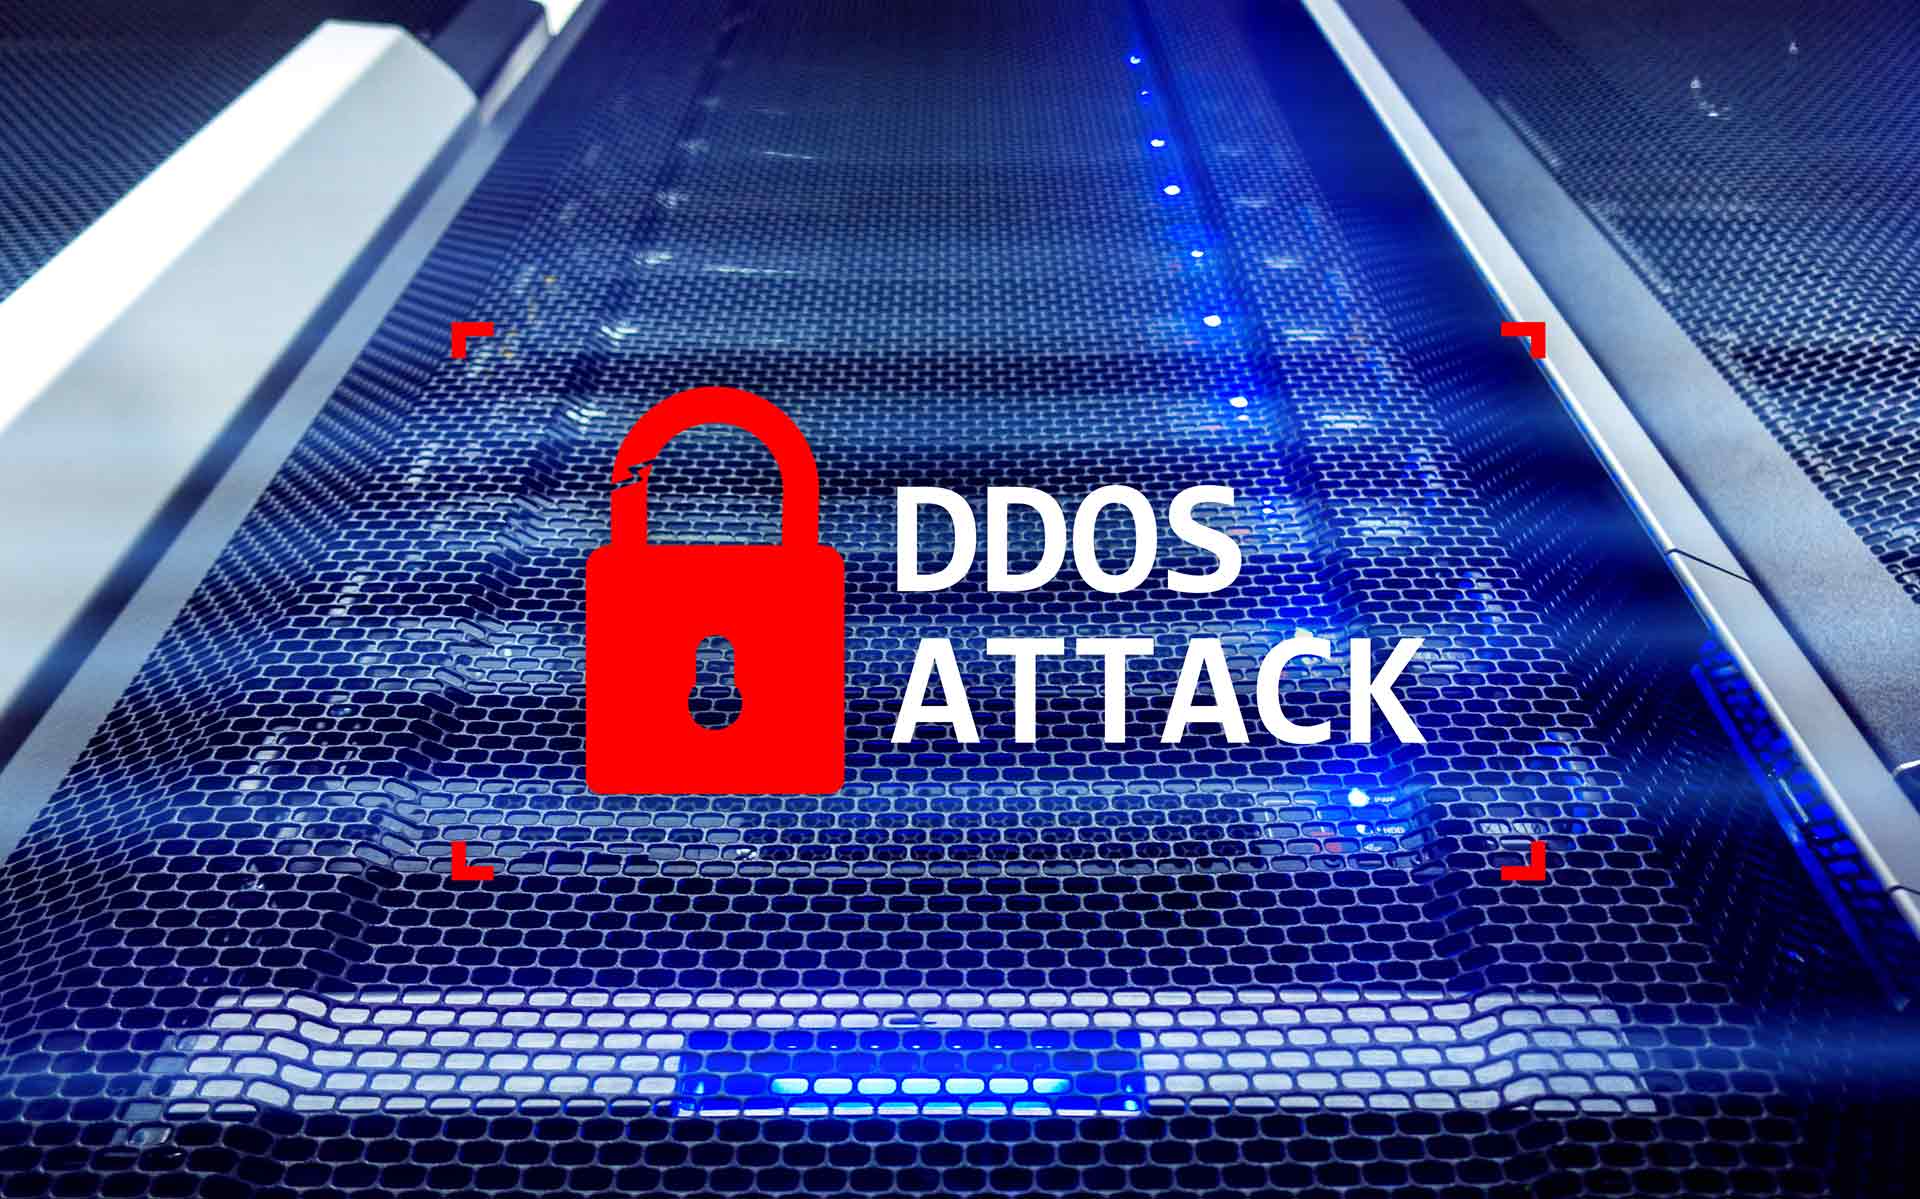 ddos-attack-cyber-protection-virus-detect-internet-technology-concept